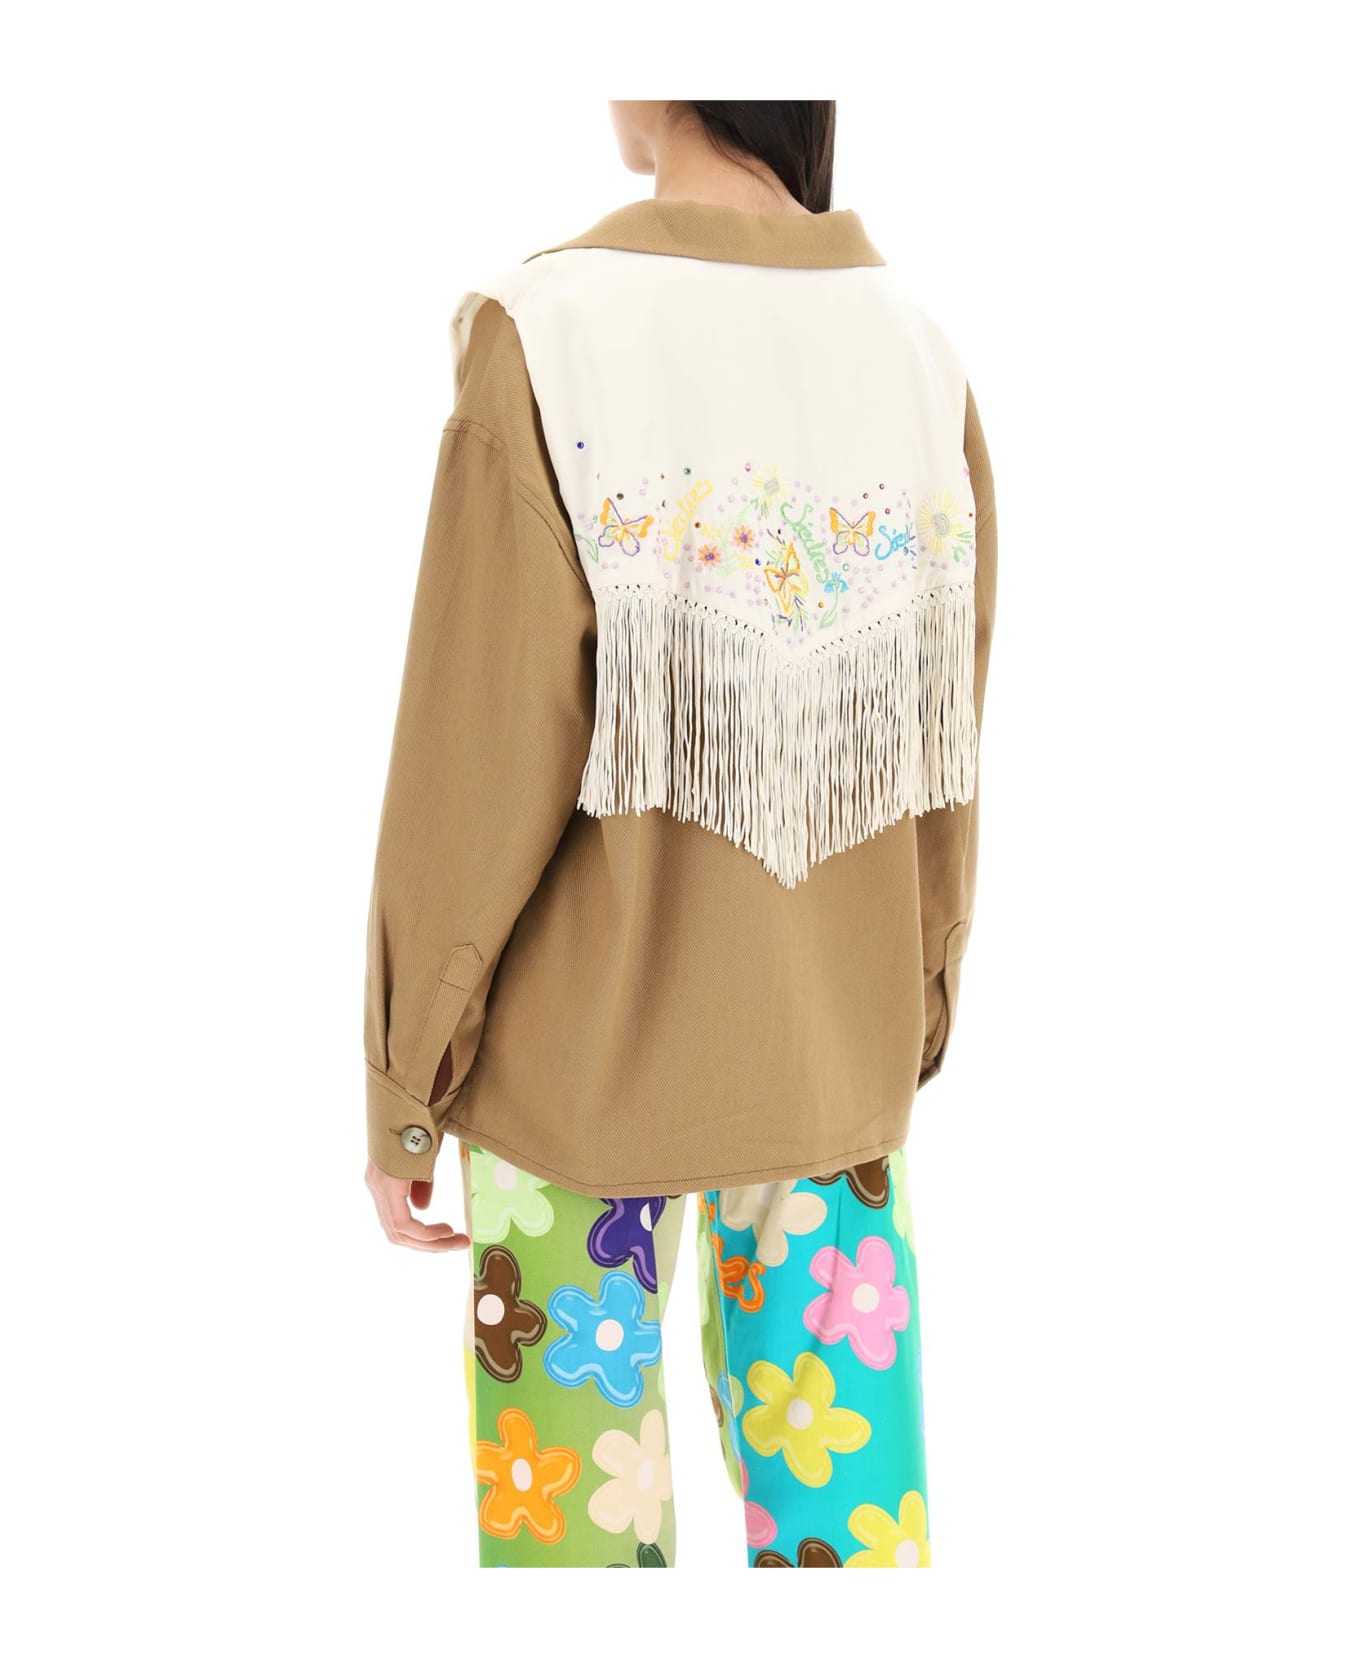 SIEDRES Overshirt With Embroidered Fringed Panel - MULTI (Brown)